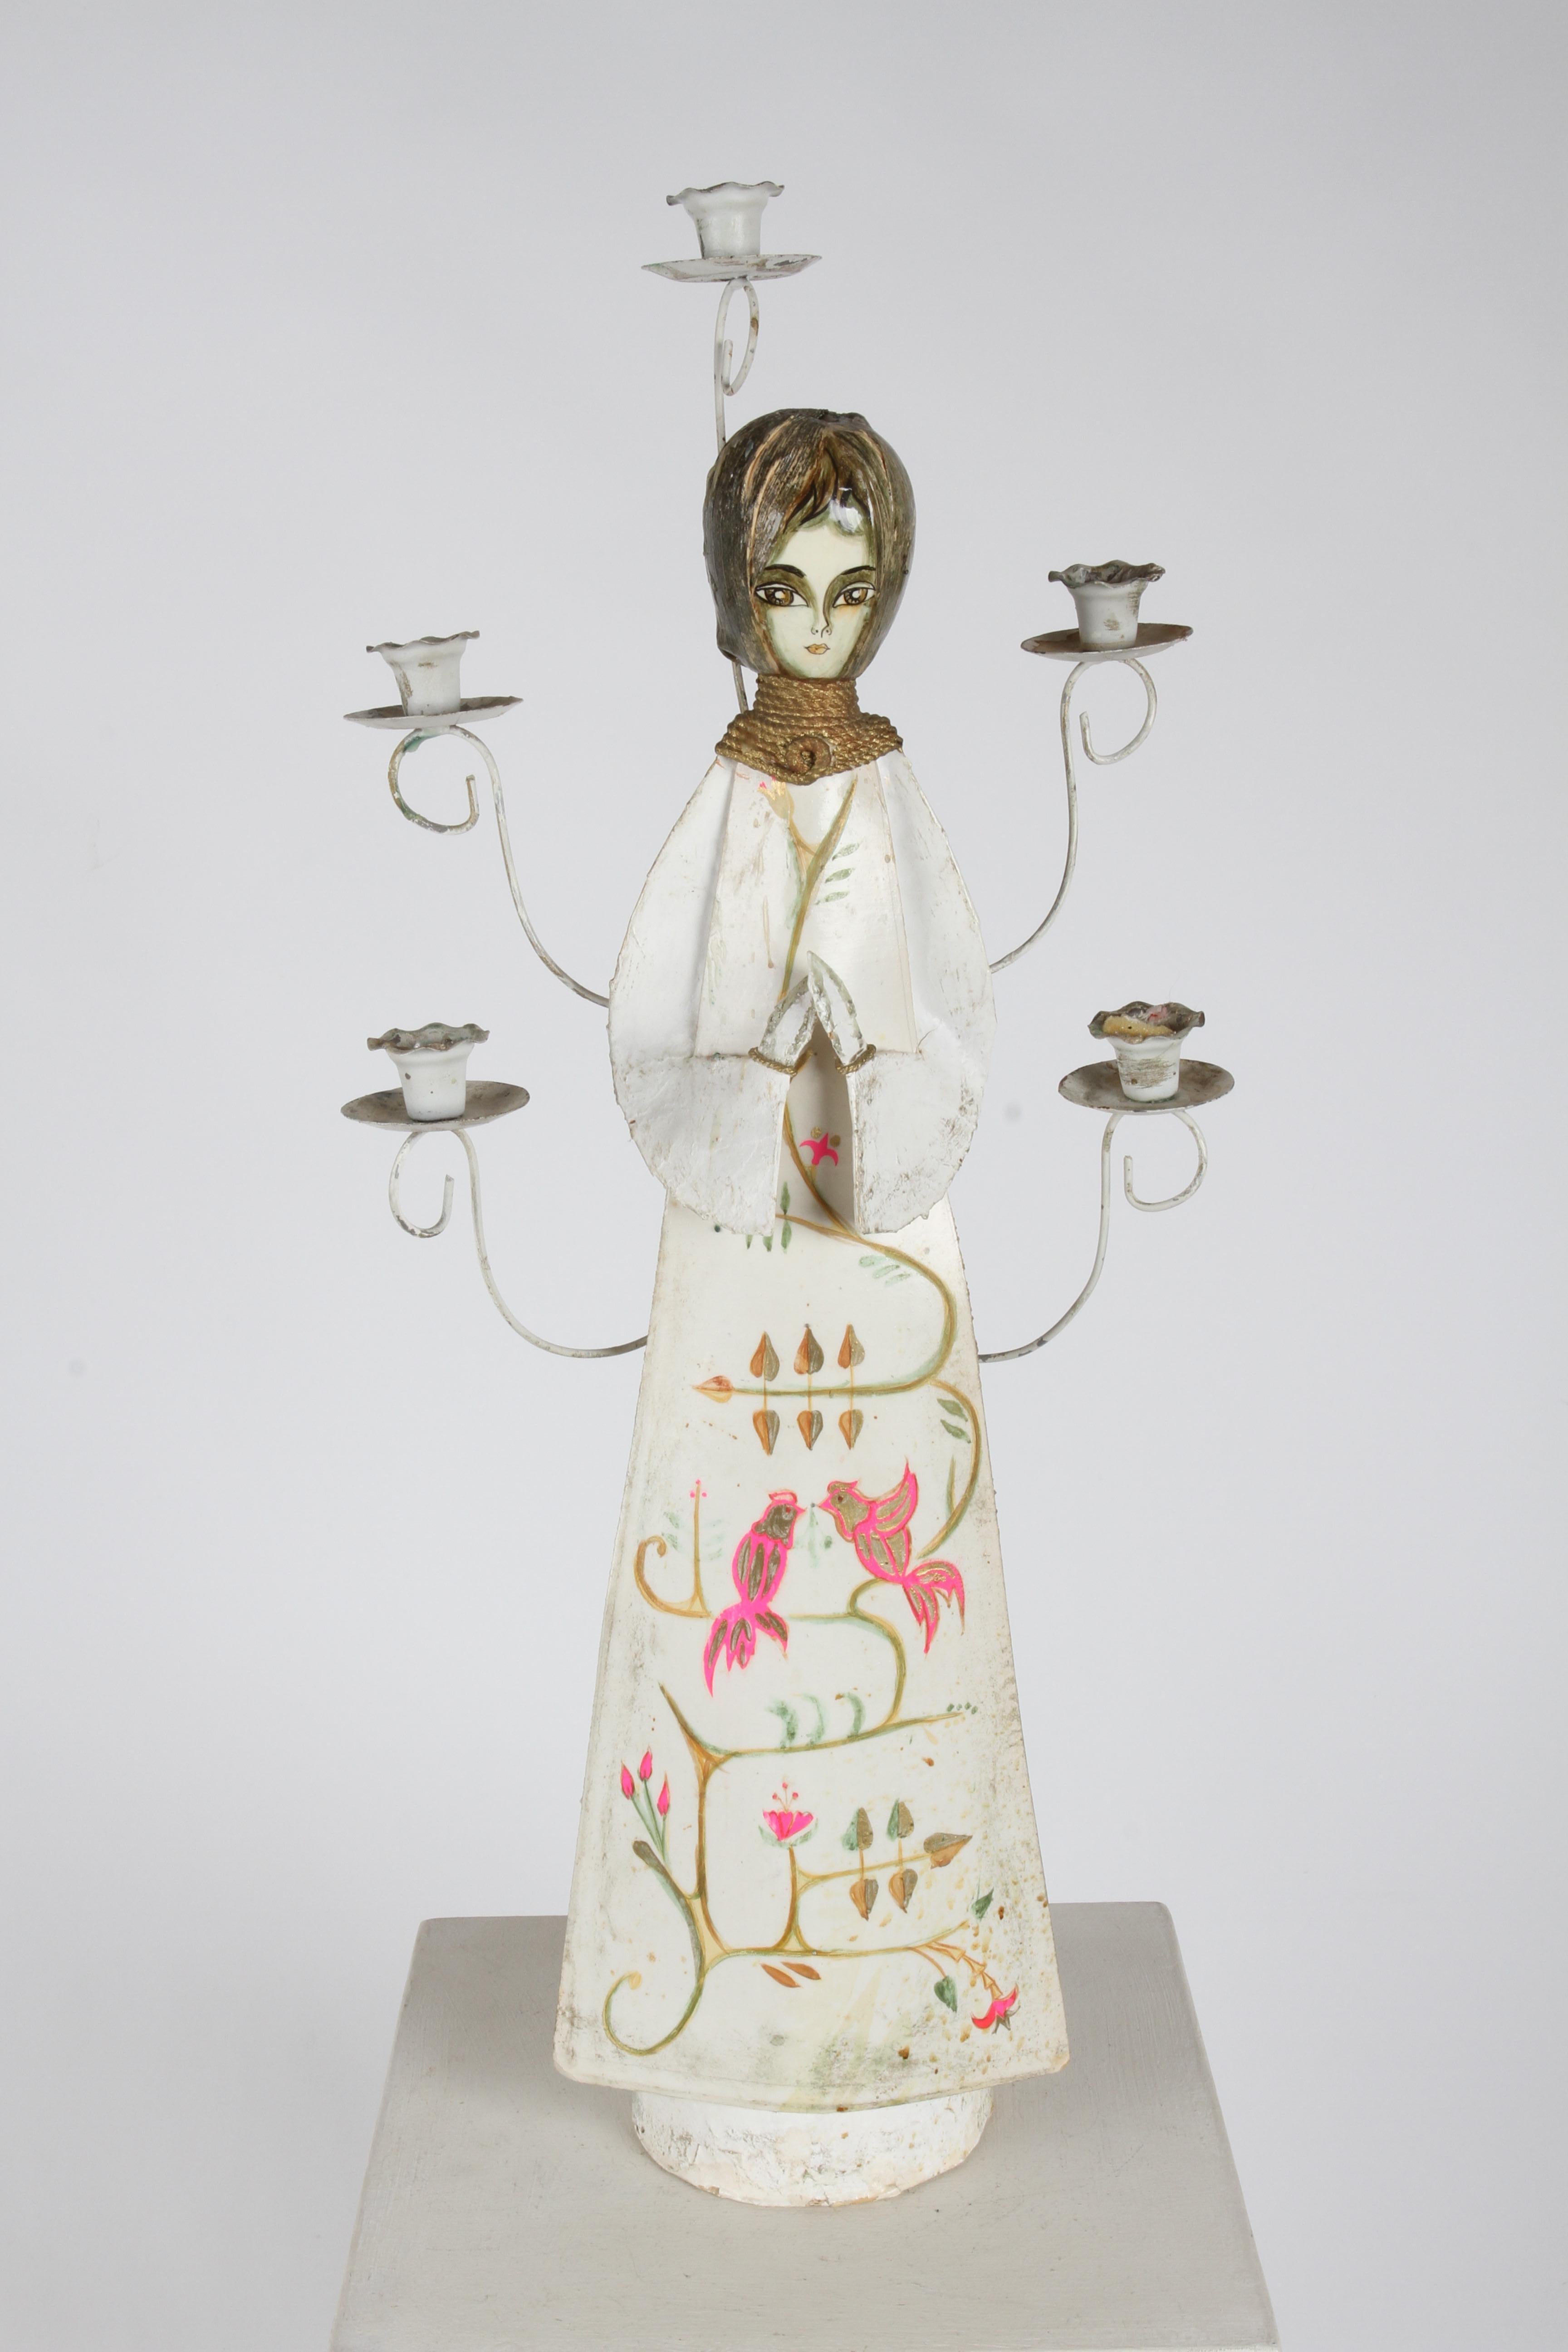 Impressive 1960s large Mexican folk art hand painted papier-mâché angel with 5 arm candelabra. Hand painted details over white robe, include hair, face, gold gilt rope collar, pink and gold birds on colorful floral vine. Removable white painted wire